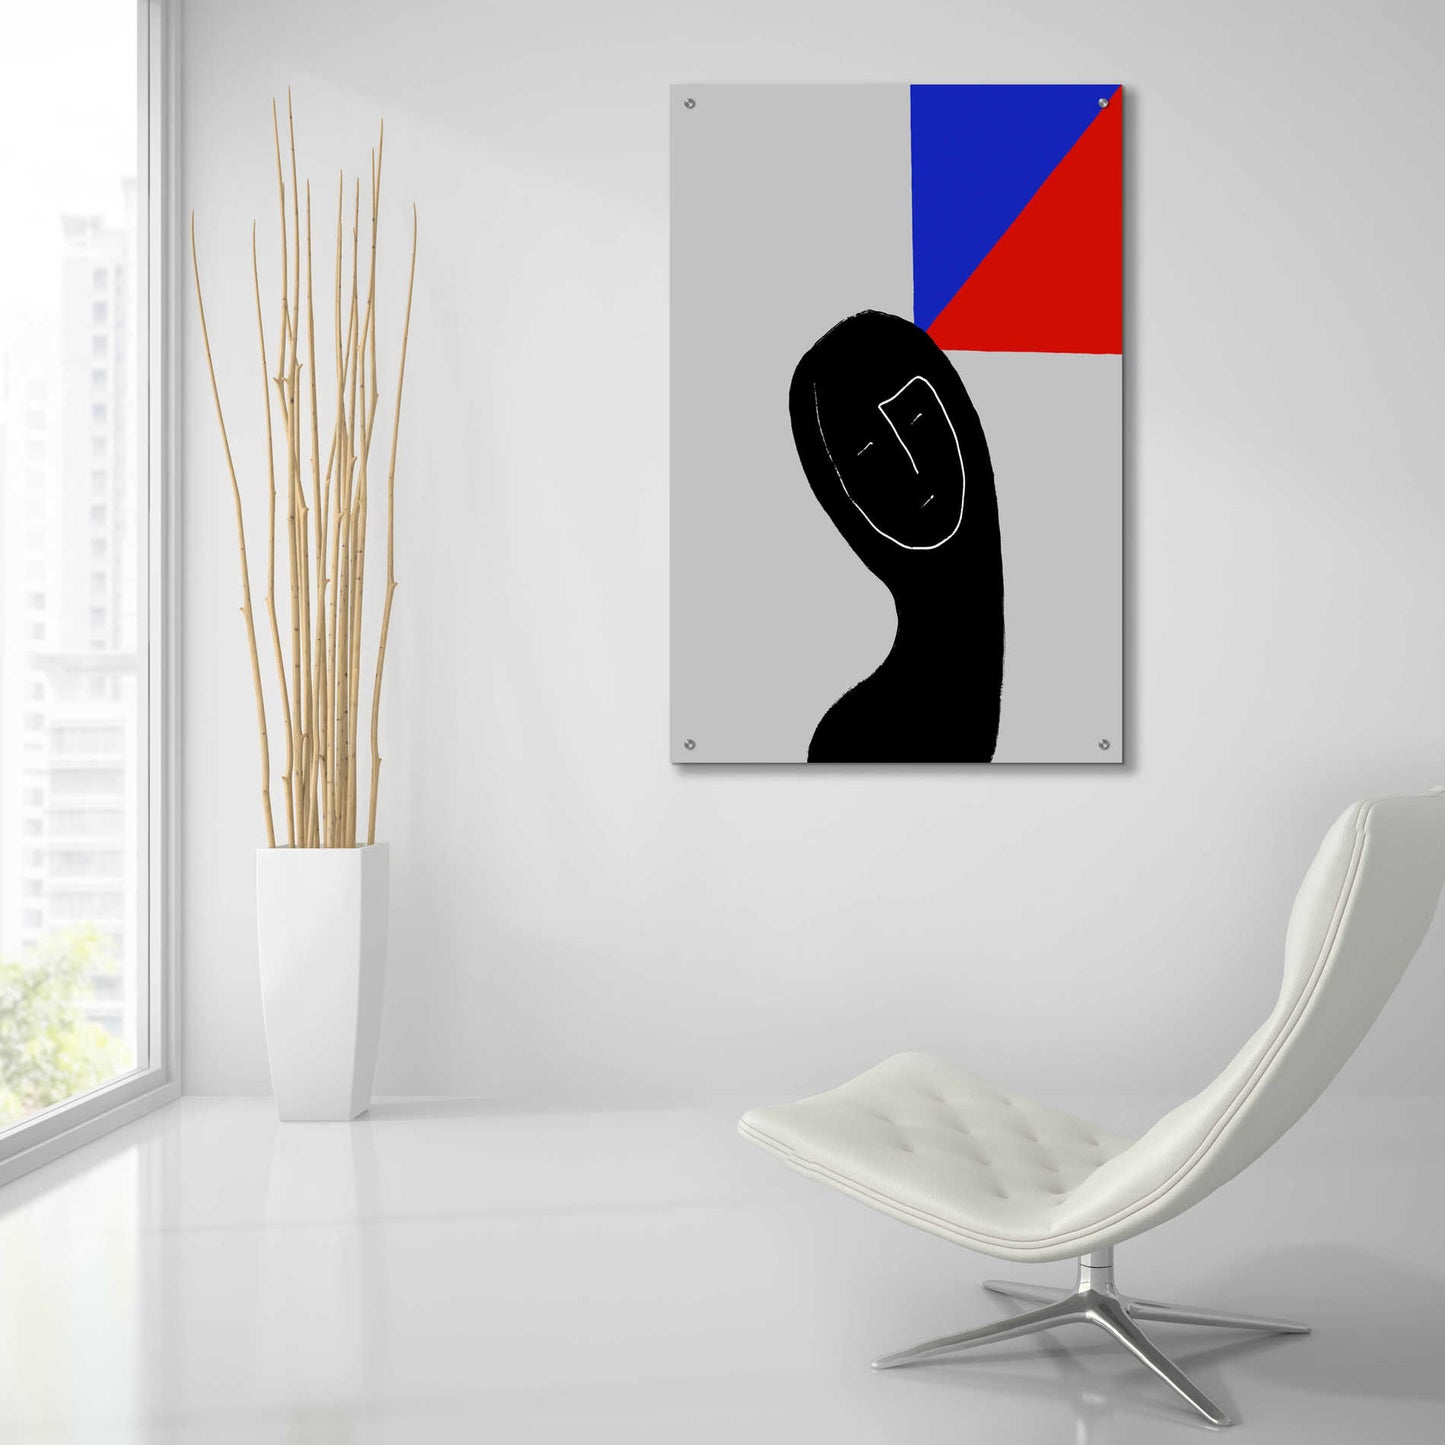 Epic Art 'Square Thought' by Cesare Bellassai, Acrylic Glass Wall Art,24x36